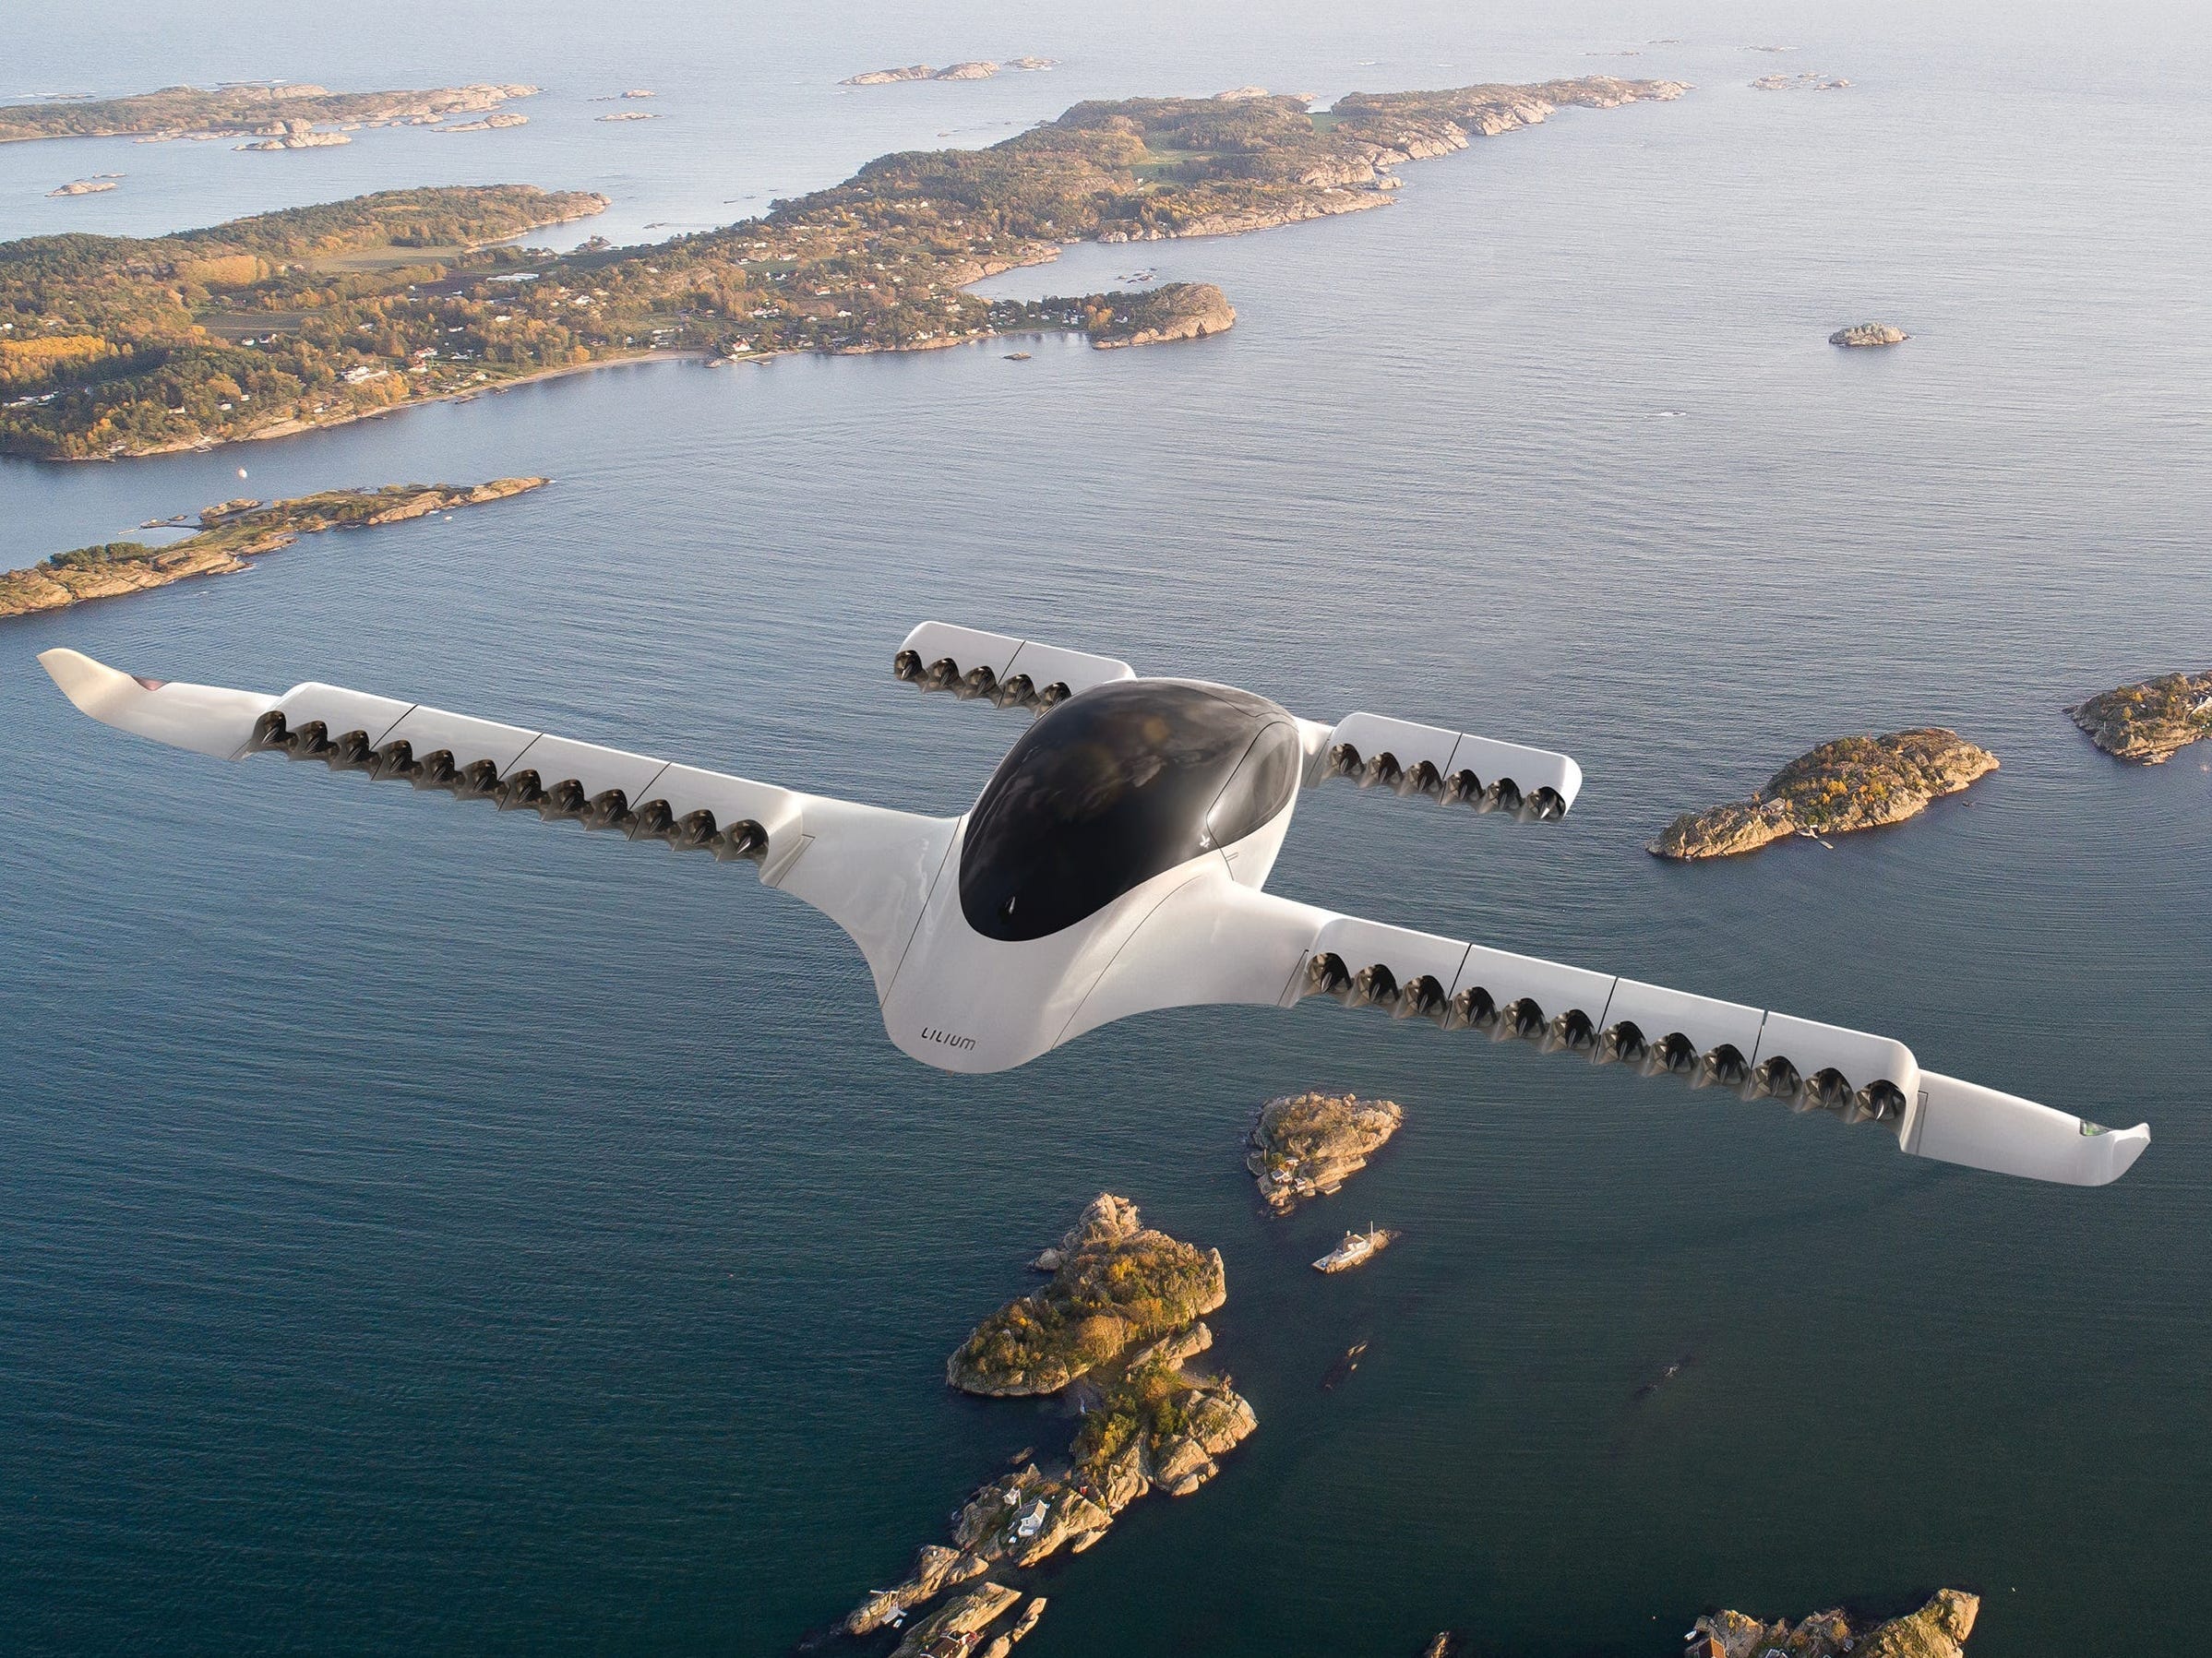 Lilium J013 air taxi flying over islands